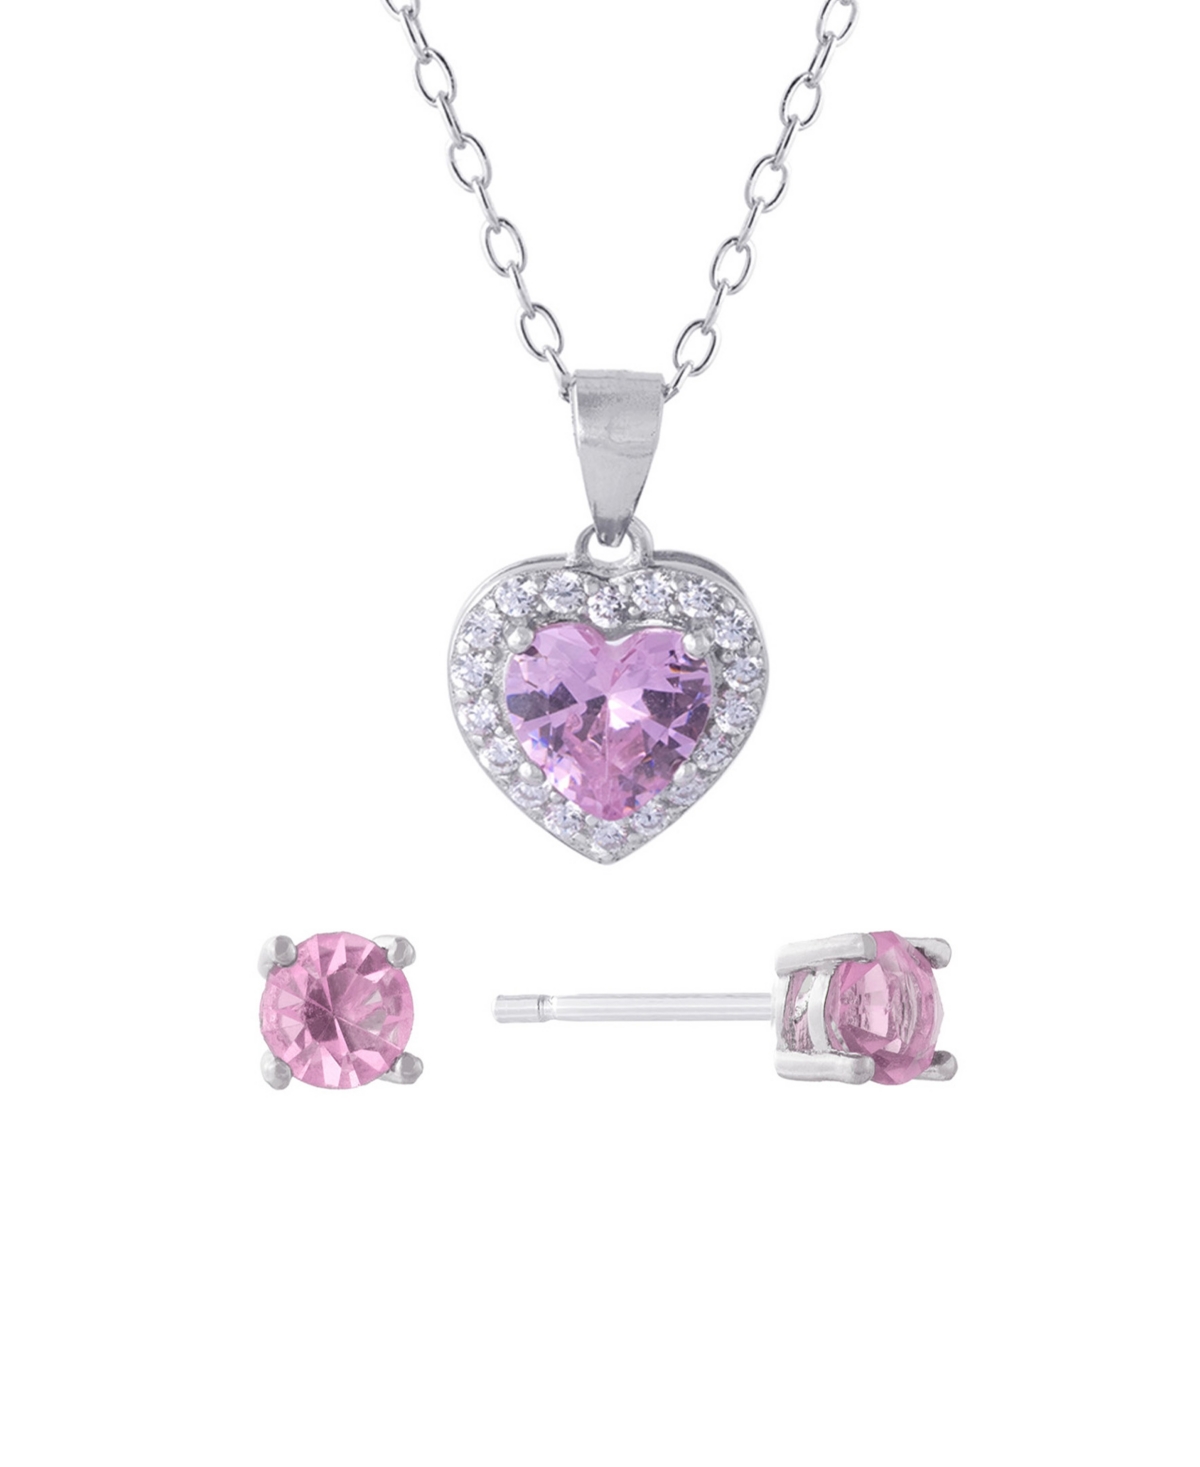 Giani Bernini Gianni Bernini 2-piece Crystal And Cubic Zirconia Heart Ball Stud Necklace Set (1.37 Ct. T.w.) In St In Sterling Silver